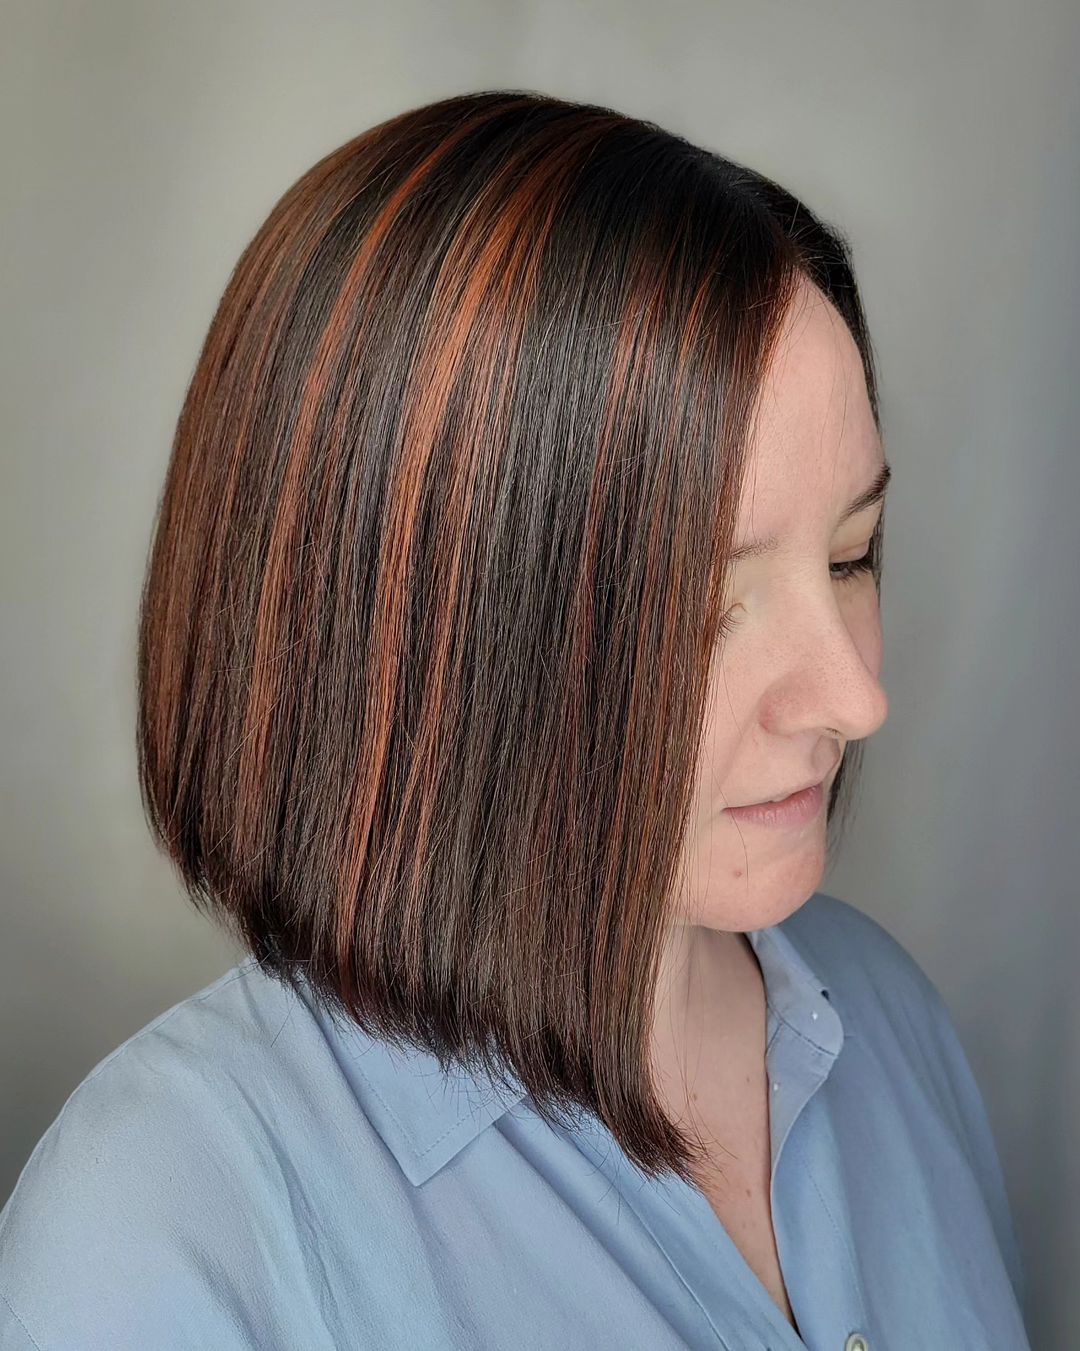 cowboy copper highlights on a short bob hairstyle